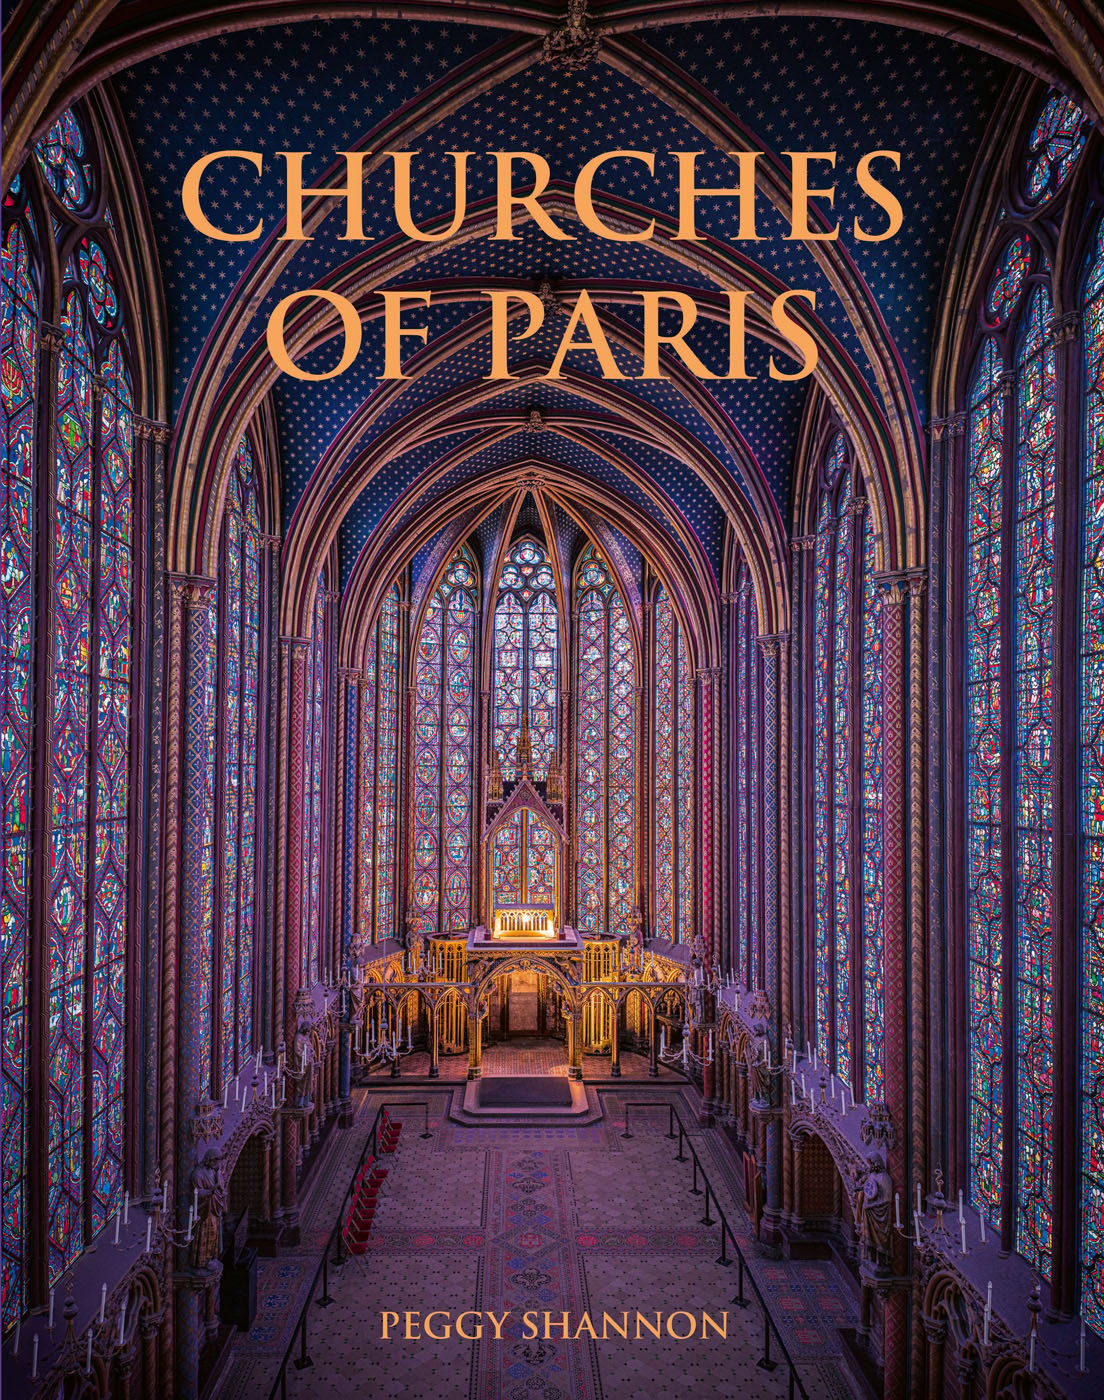 Gothic interior of Sainte-Chapelle in Paris, stained glass windows with fleurs de lys ceiling decoration, Churches of Paris Peggy Shannon in gold font to top and bottom of cover.